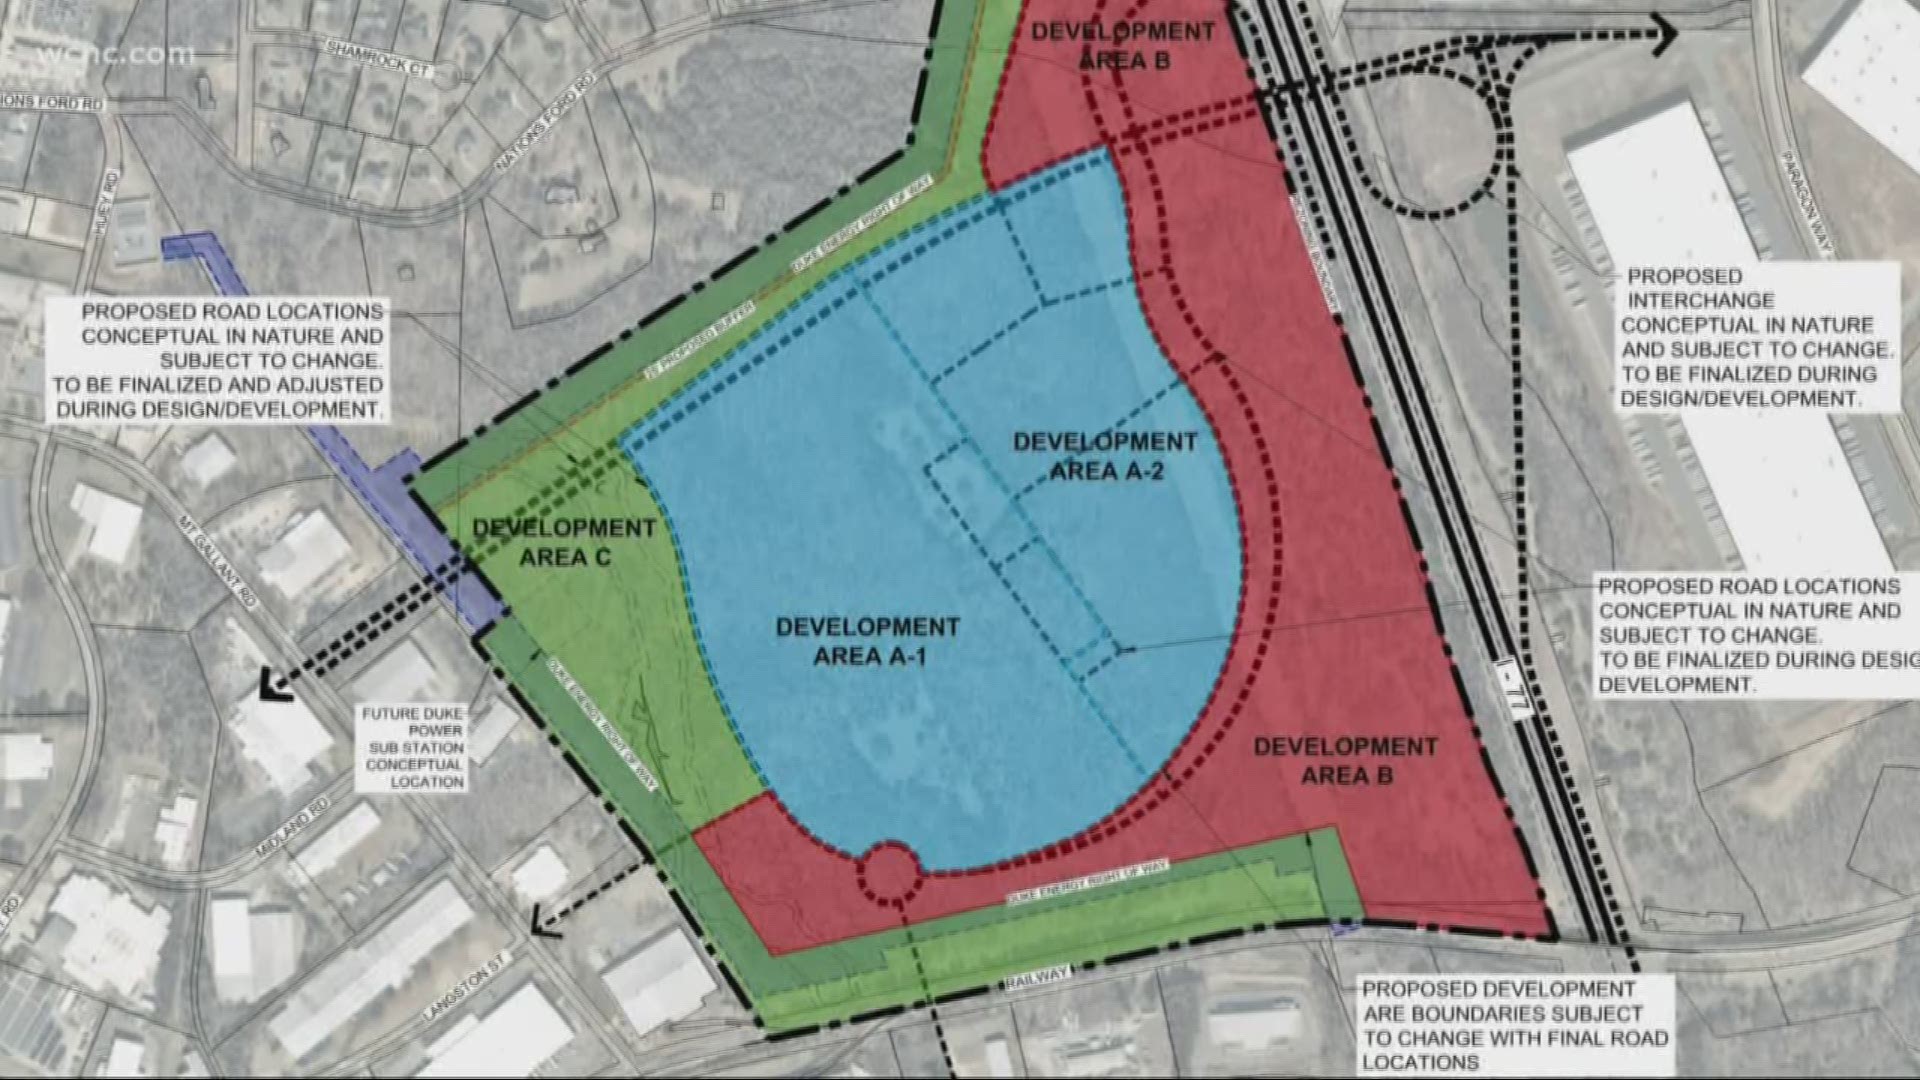 The land is approximately 234 acres and is primarily composed of undeveloped forest. For context, the Panthers' current facilities in uptown sit on just 33 acres.